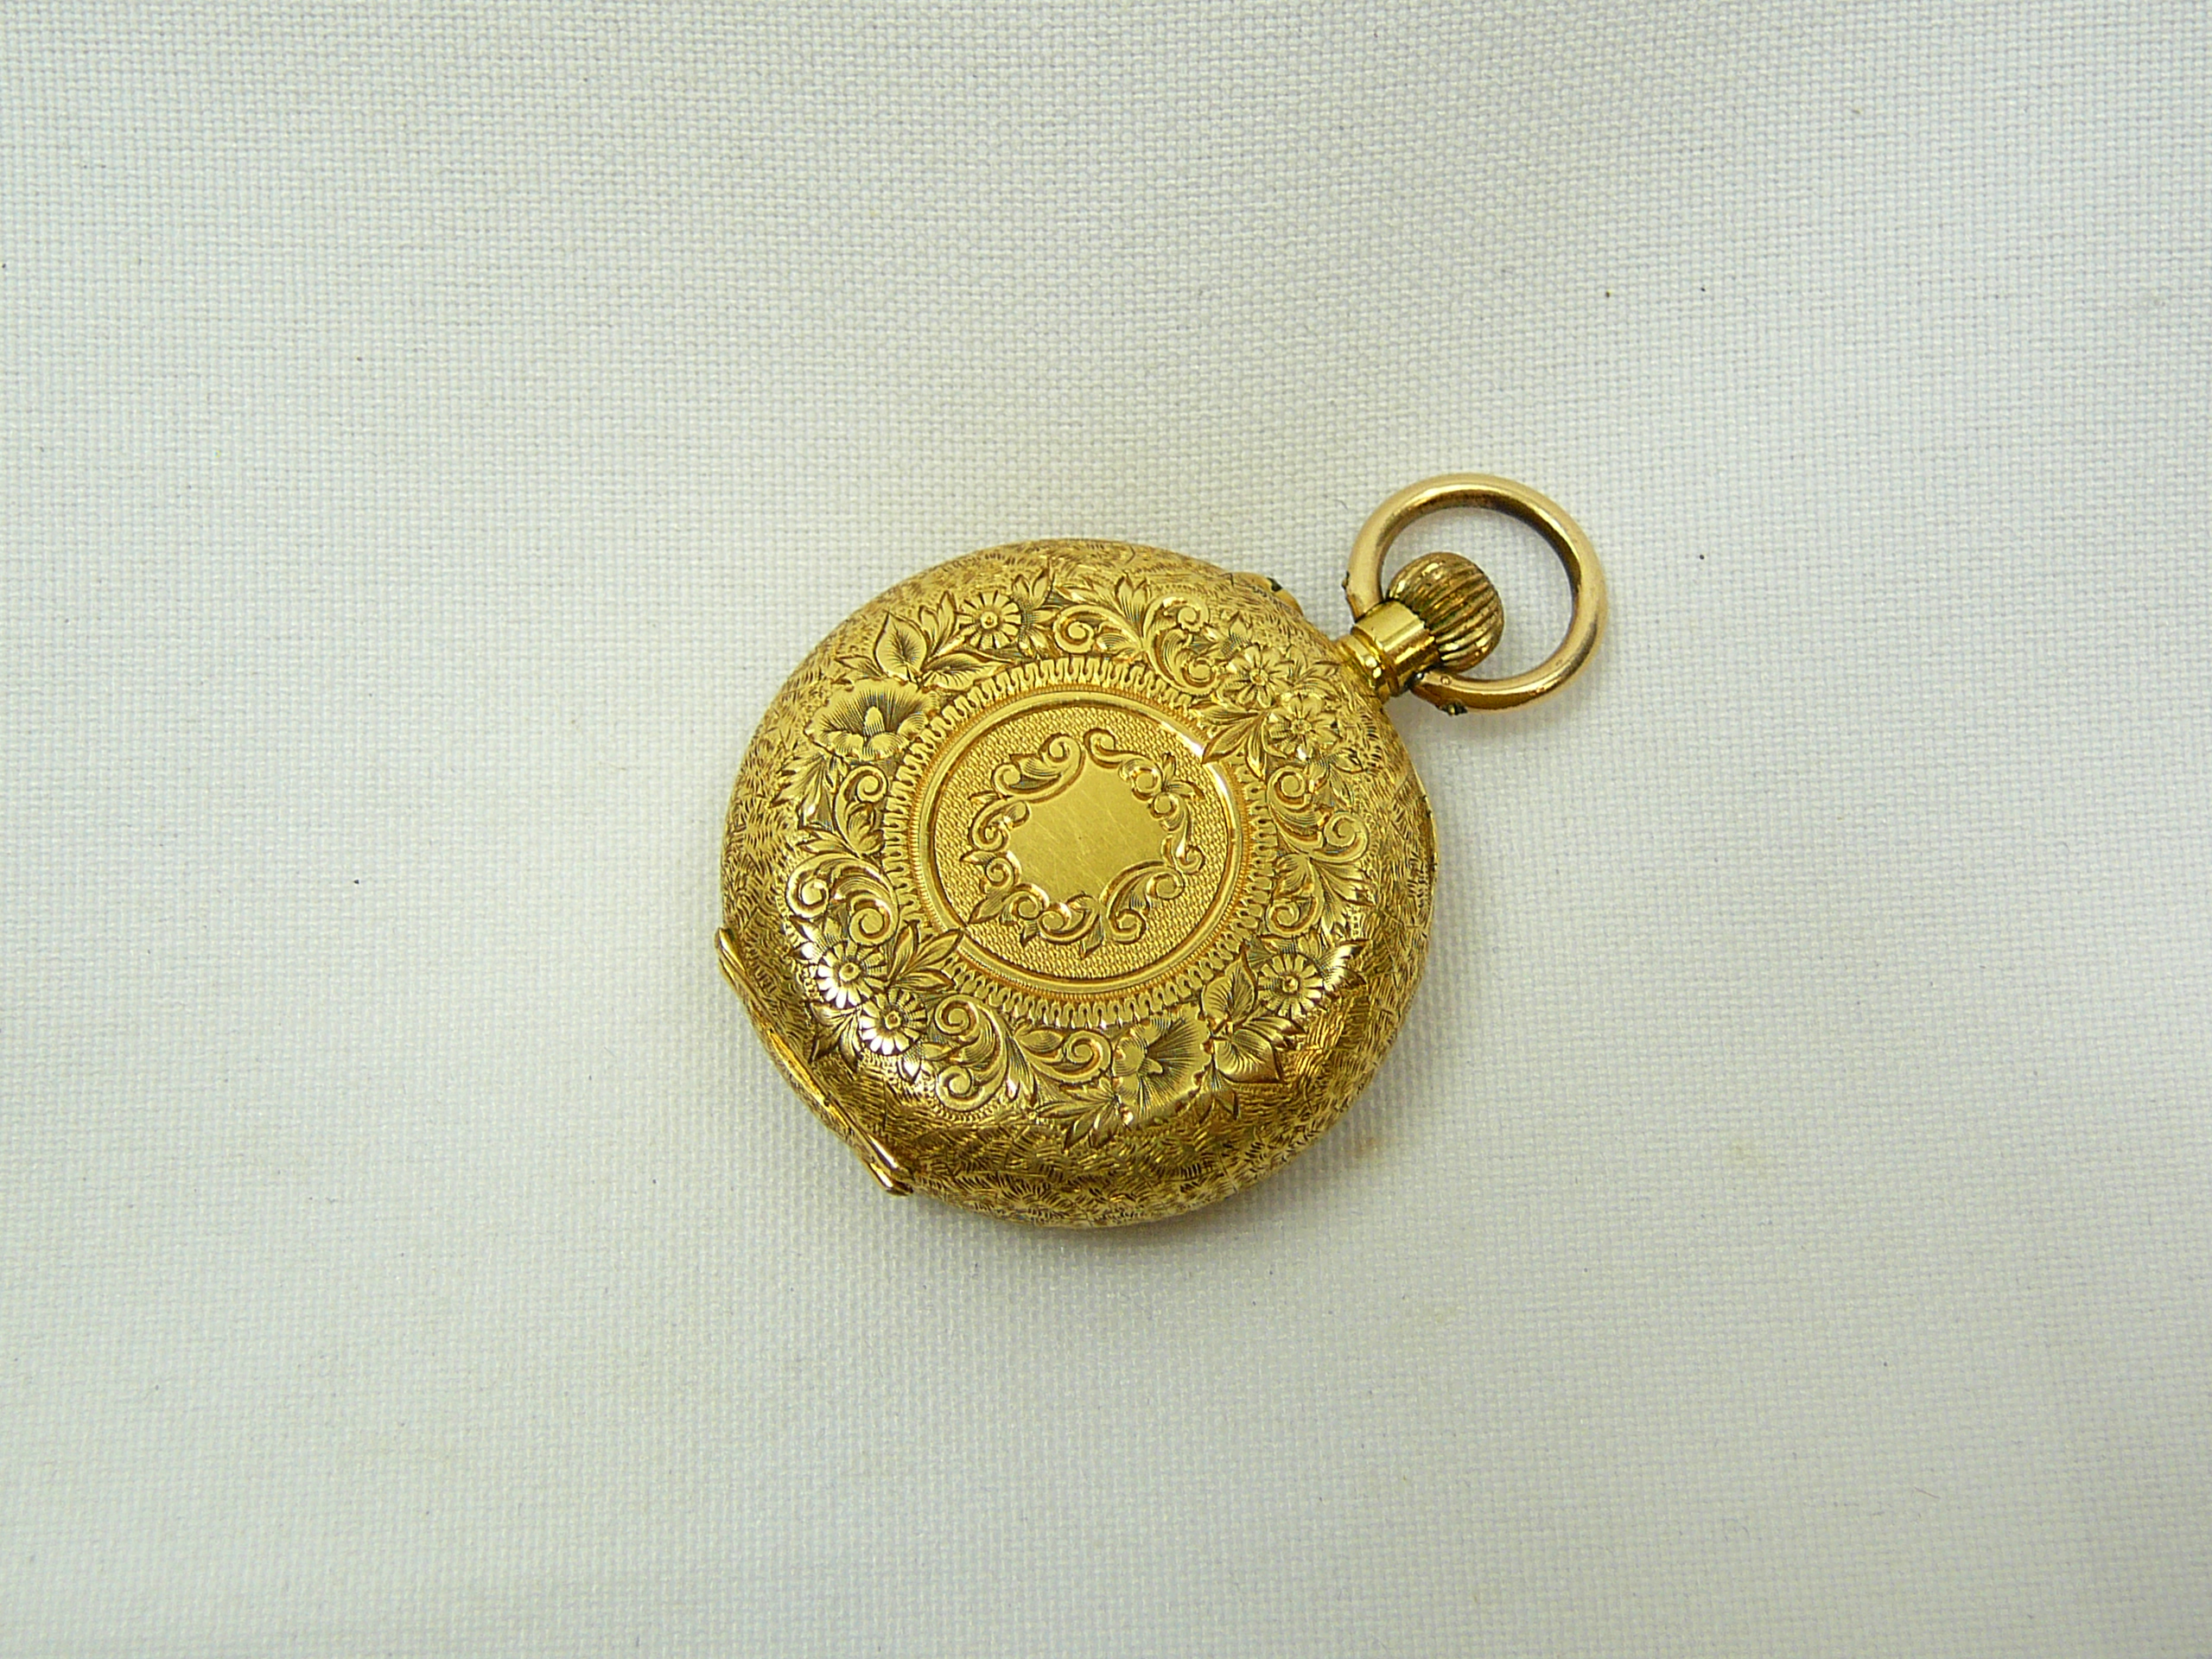 Ladies Antique Gold Fob Watch - Image 2 of 4